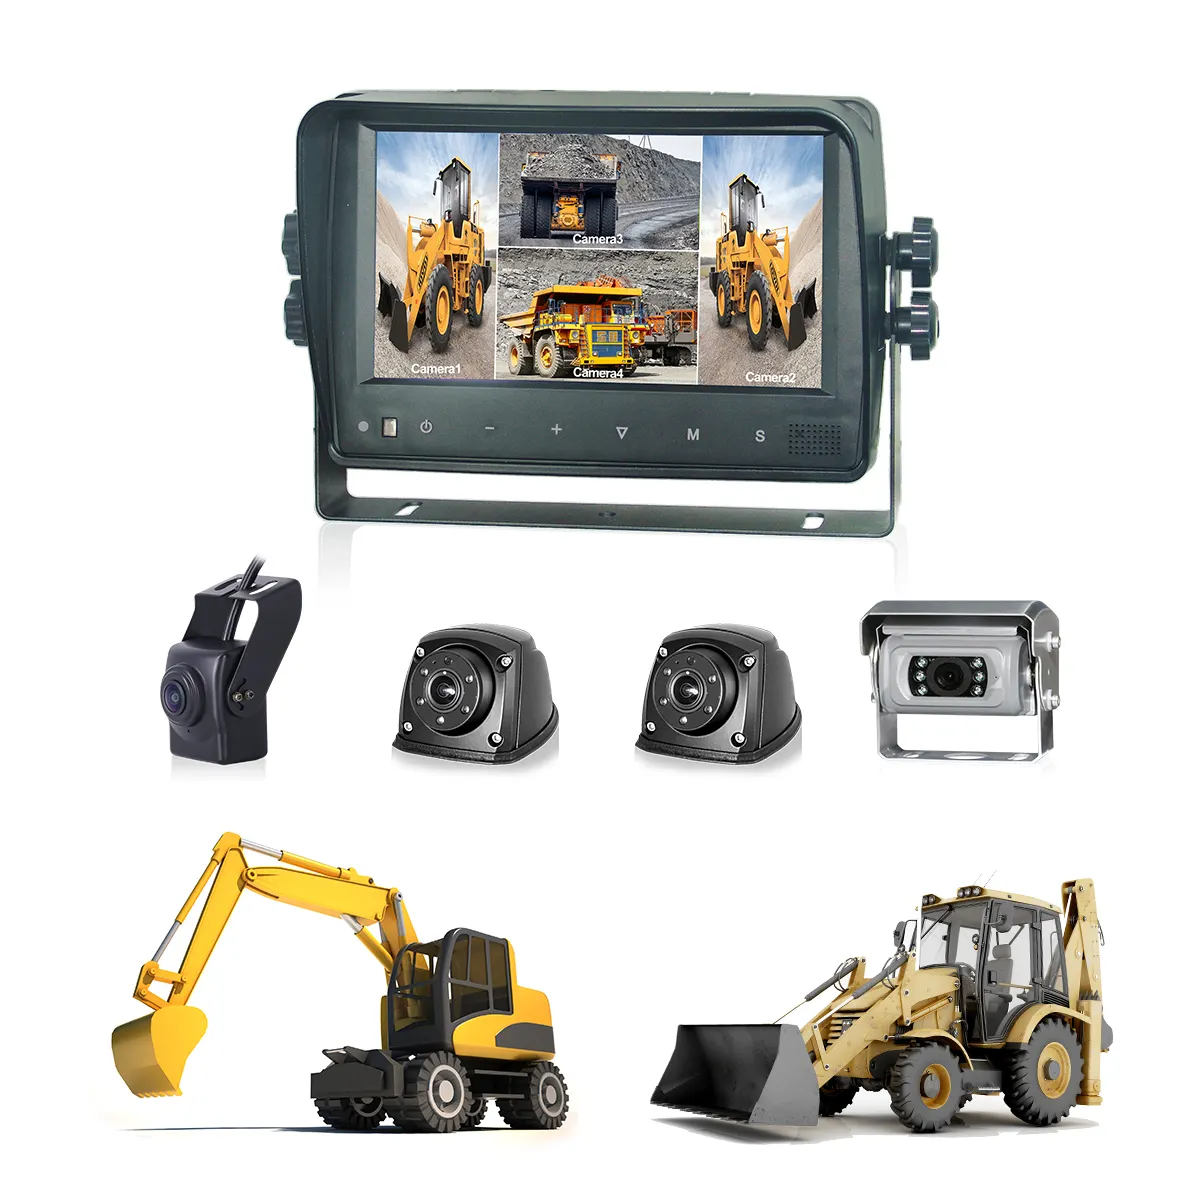 STONKAM OEM OED 7 inch screen for bus reverse cameras car   vehicle camera with monitor for cars trucks service vehicles